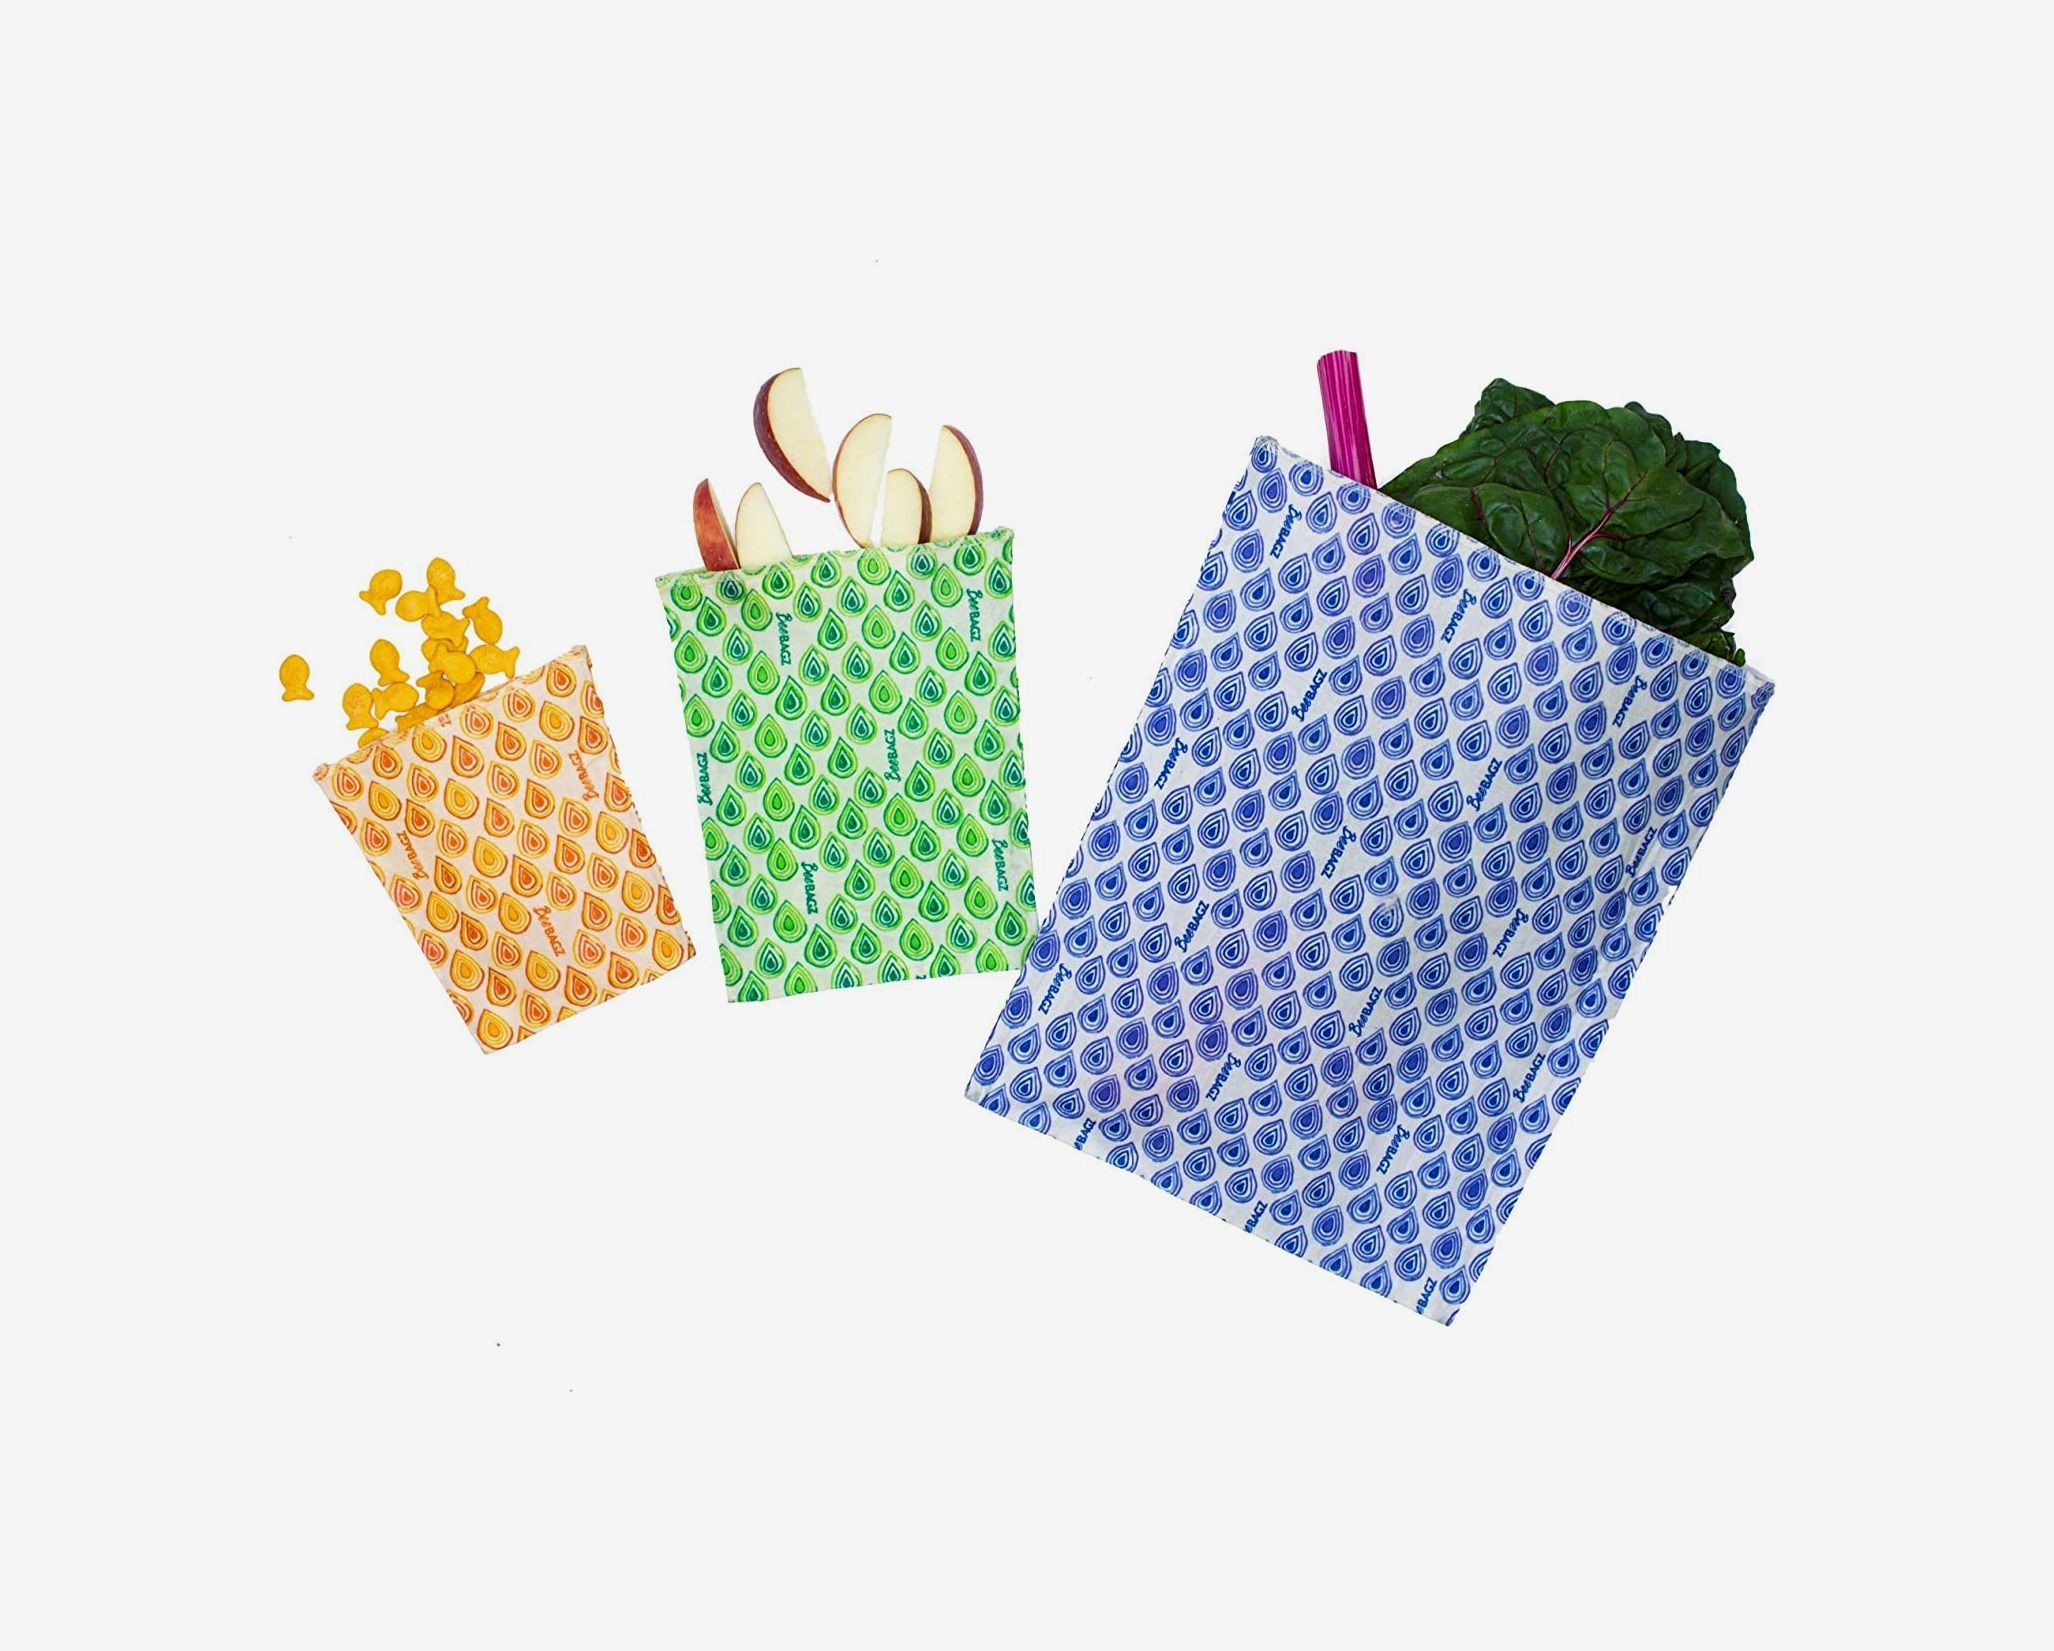 IDEATECH Reusable Storage Bags Stand Up, 18 Pack Reusable Sandwich Bags,  BPA Free Freezer Lunch Bags, Reusable Bags Silicone for Travel, Food